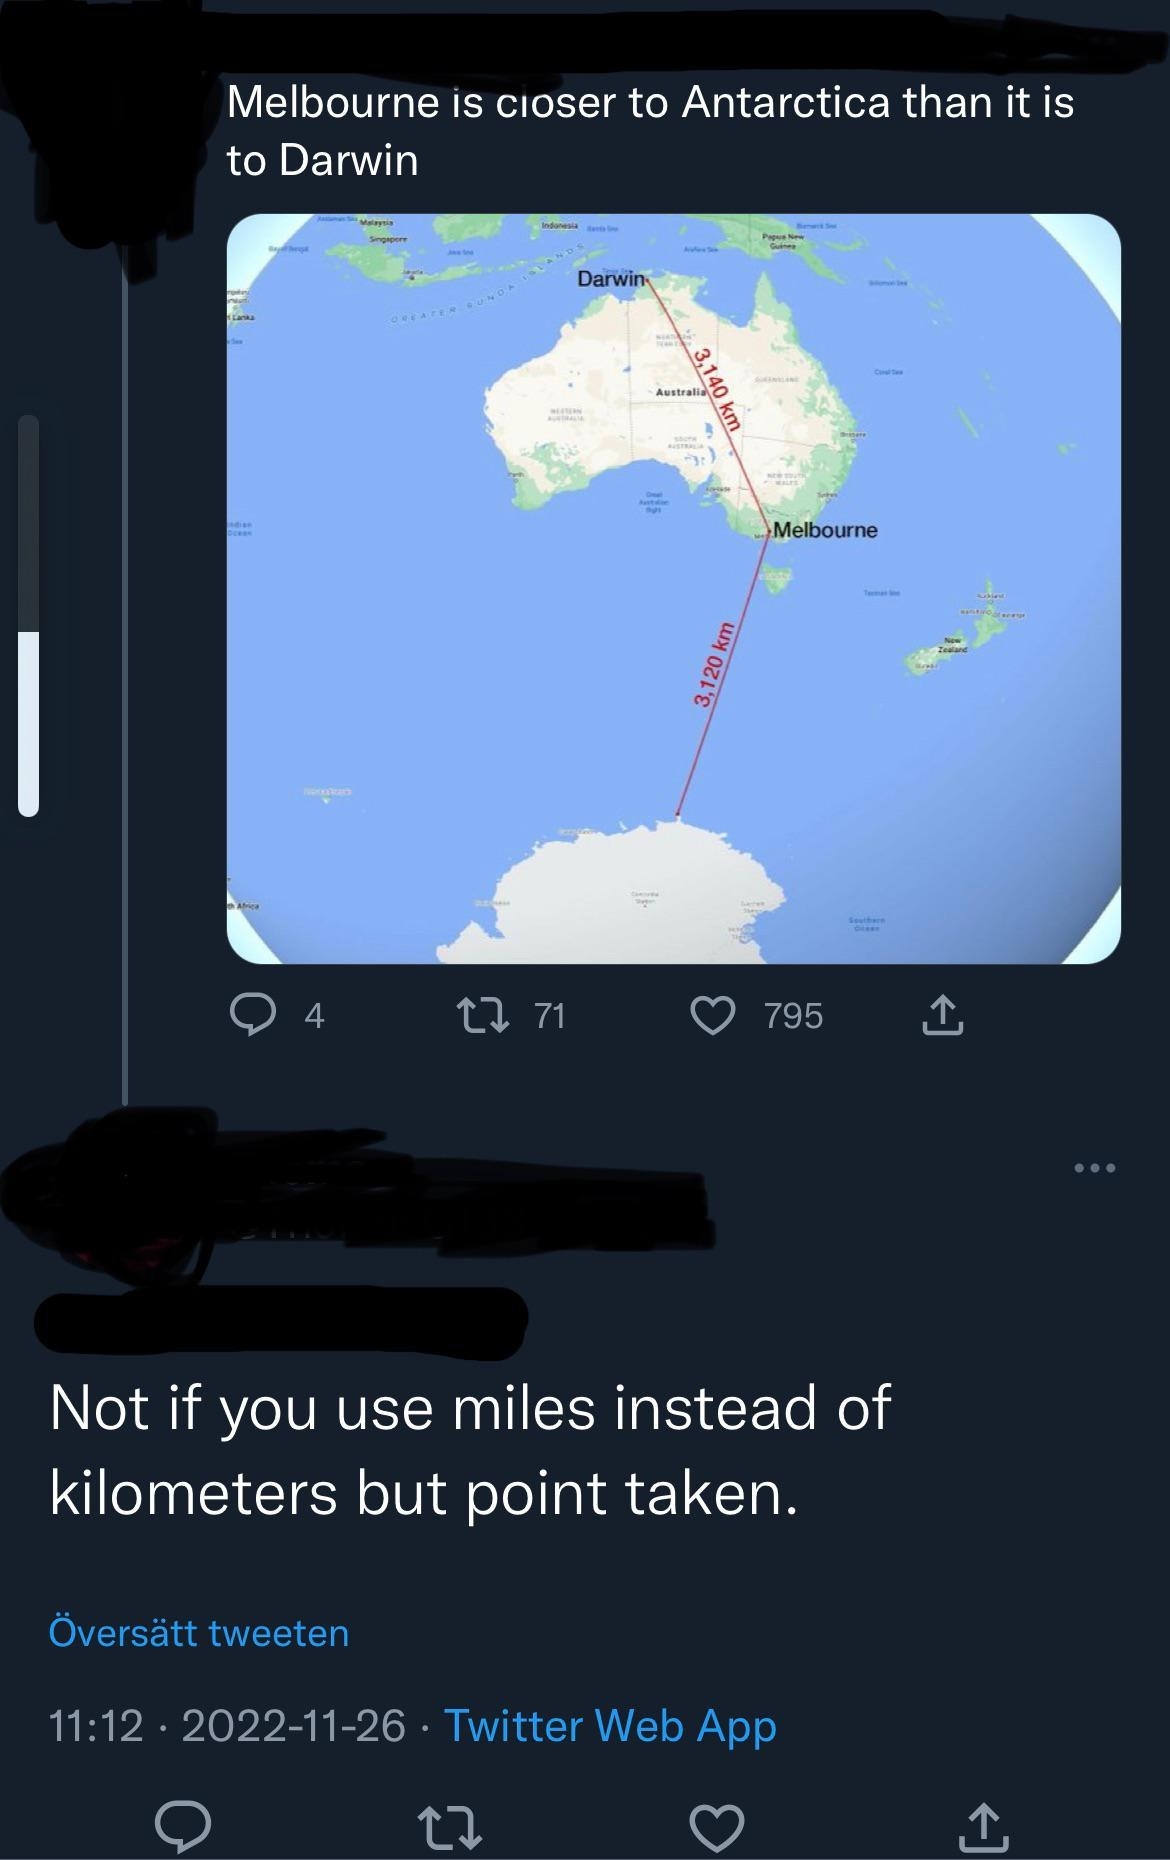 &quot;Not if you use miles instead of kilometers but point taken.&quot;